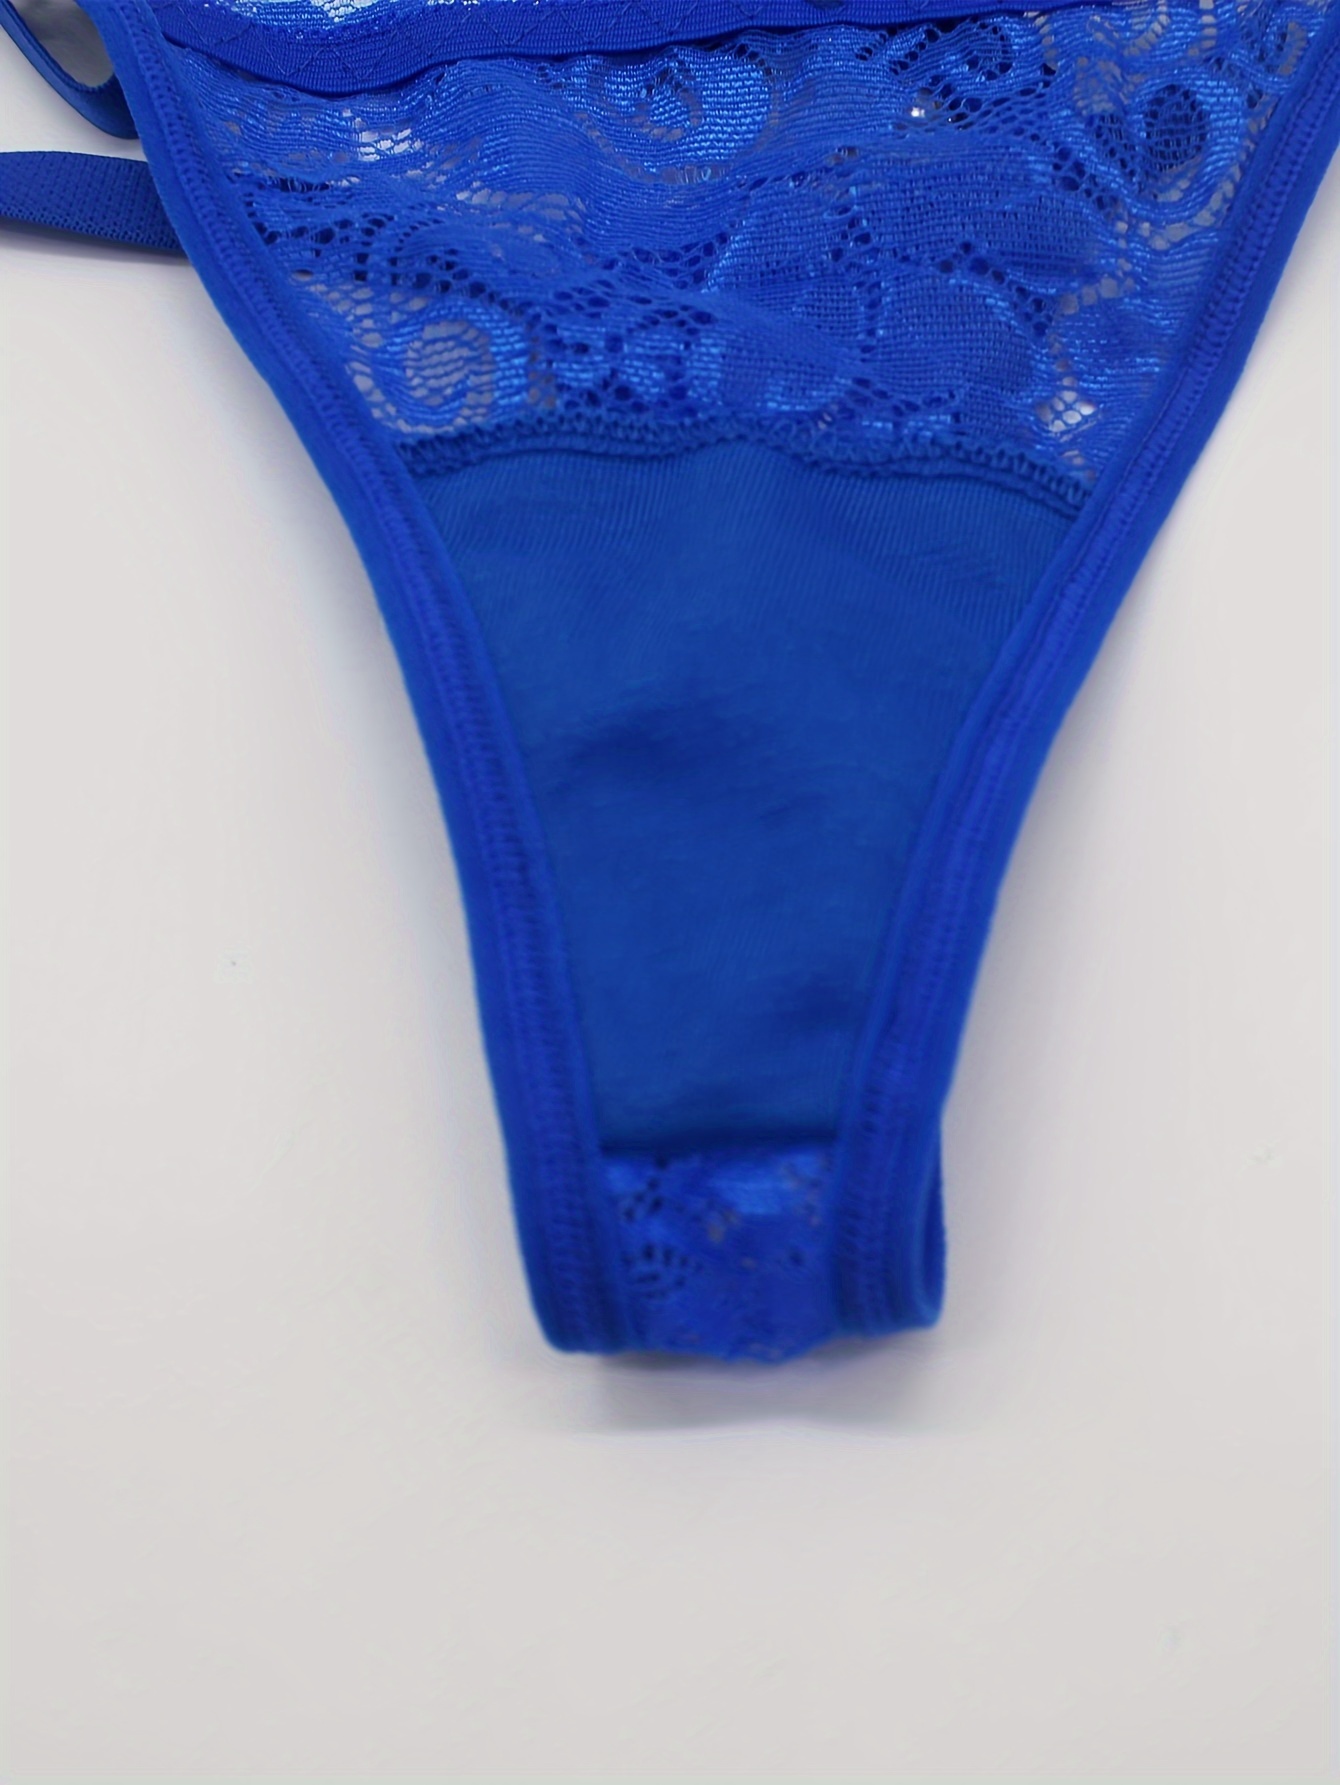 Shyle Royal Blue Floral Lace Thong Panty - Buy Online Thong